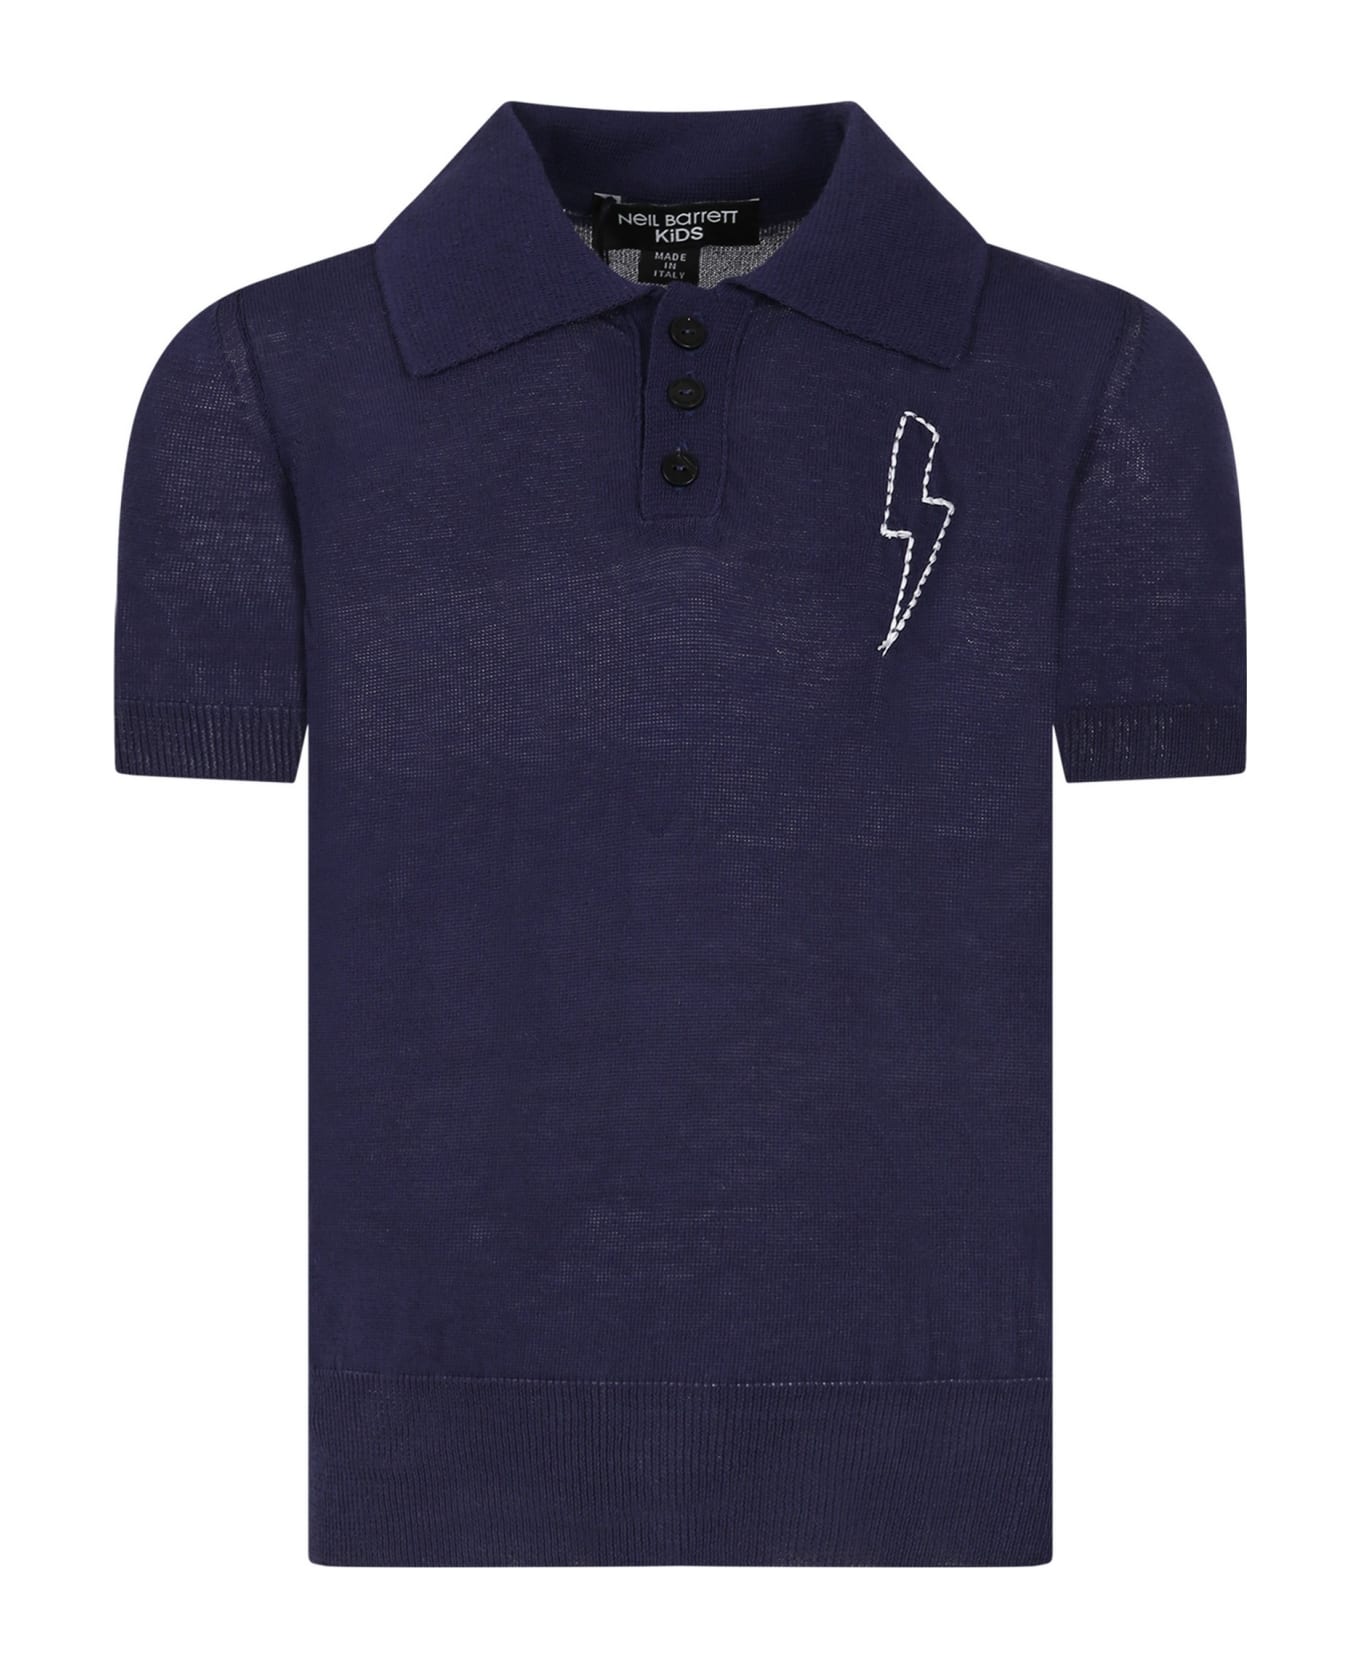 Neil Barrett Blue Polo Shirt With Iconic Thunderbolt For Boy - Blue Tシャツ＆ポロシャツ